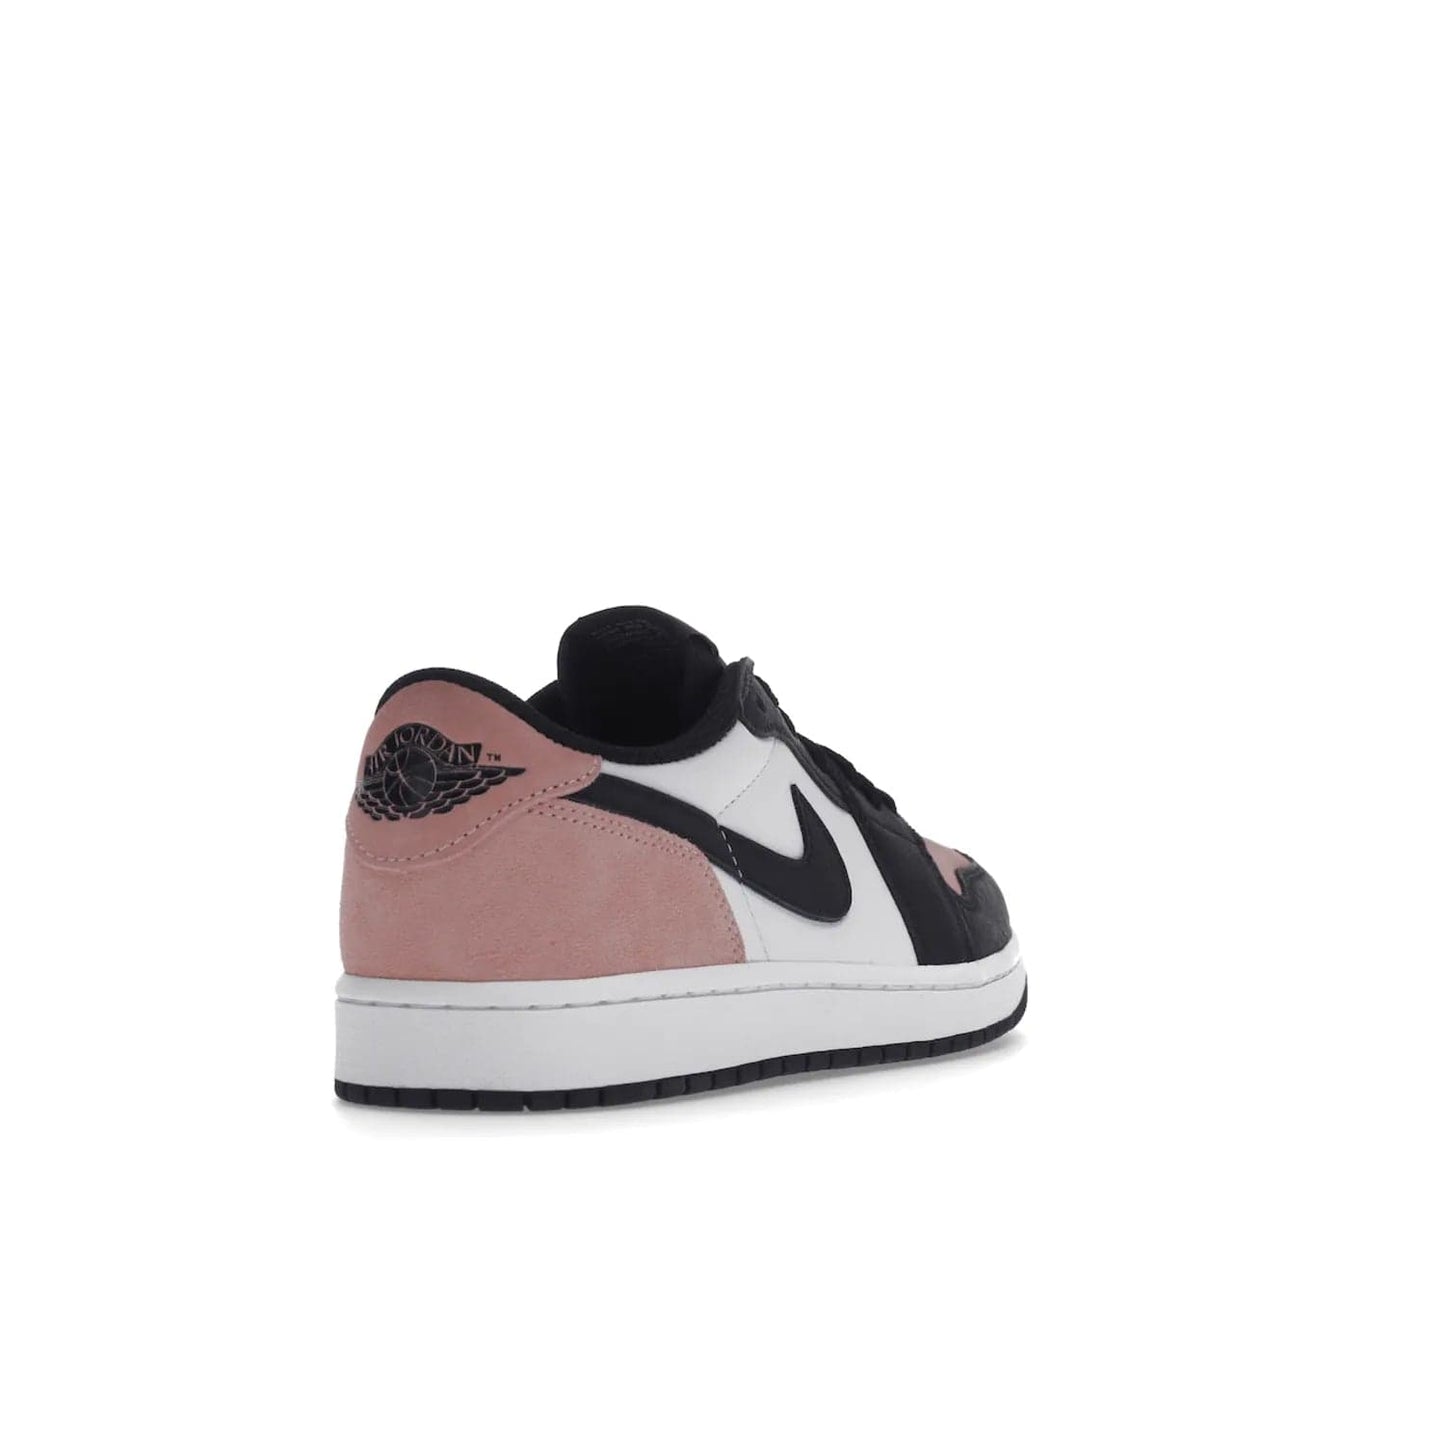 Jordan 1 Low OG Bleached Coral - Image 31 - Only at www.BallersClubKickz.com - Introducing the Air Jordan 1 Low OG Bleached Coral. Constructed with white leather, black cracked leather & Bleached Coral suede. Signature Jordan Wings logo, white Air sole. Get the pack in July 2022 and stand out.